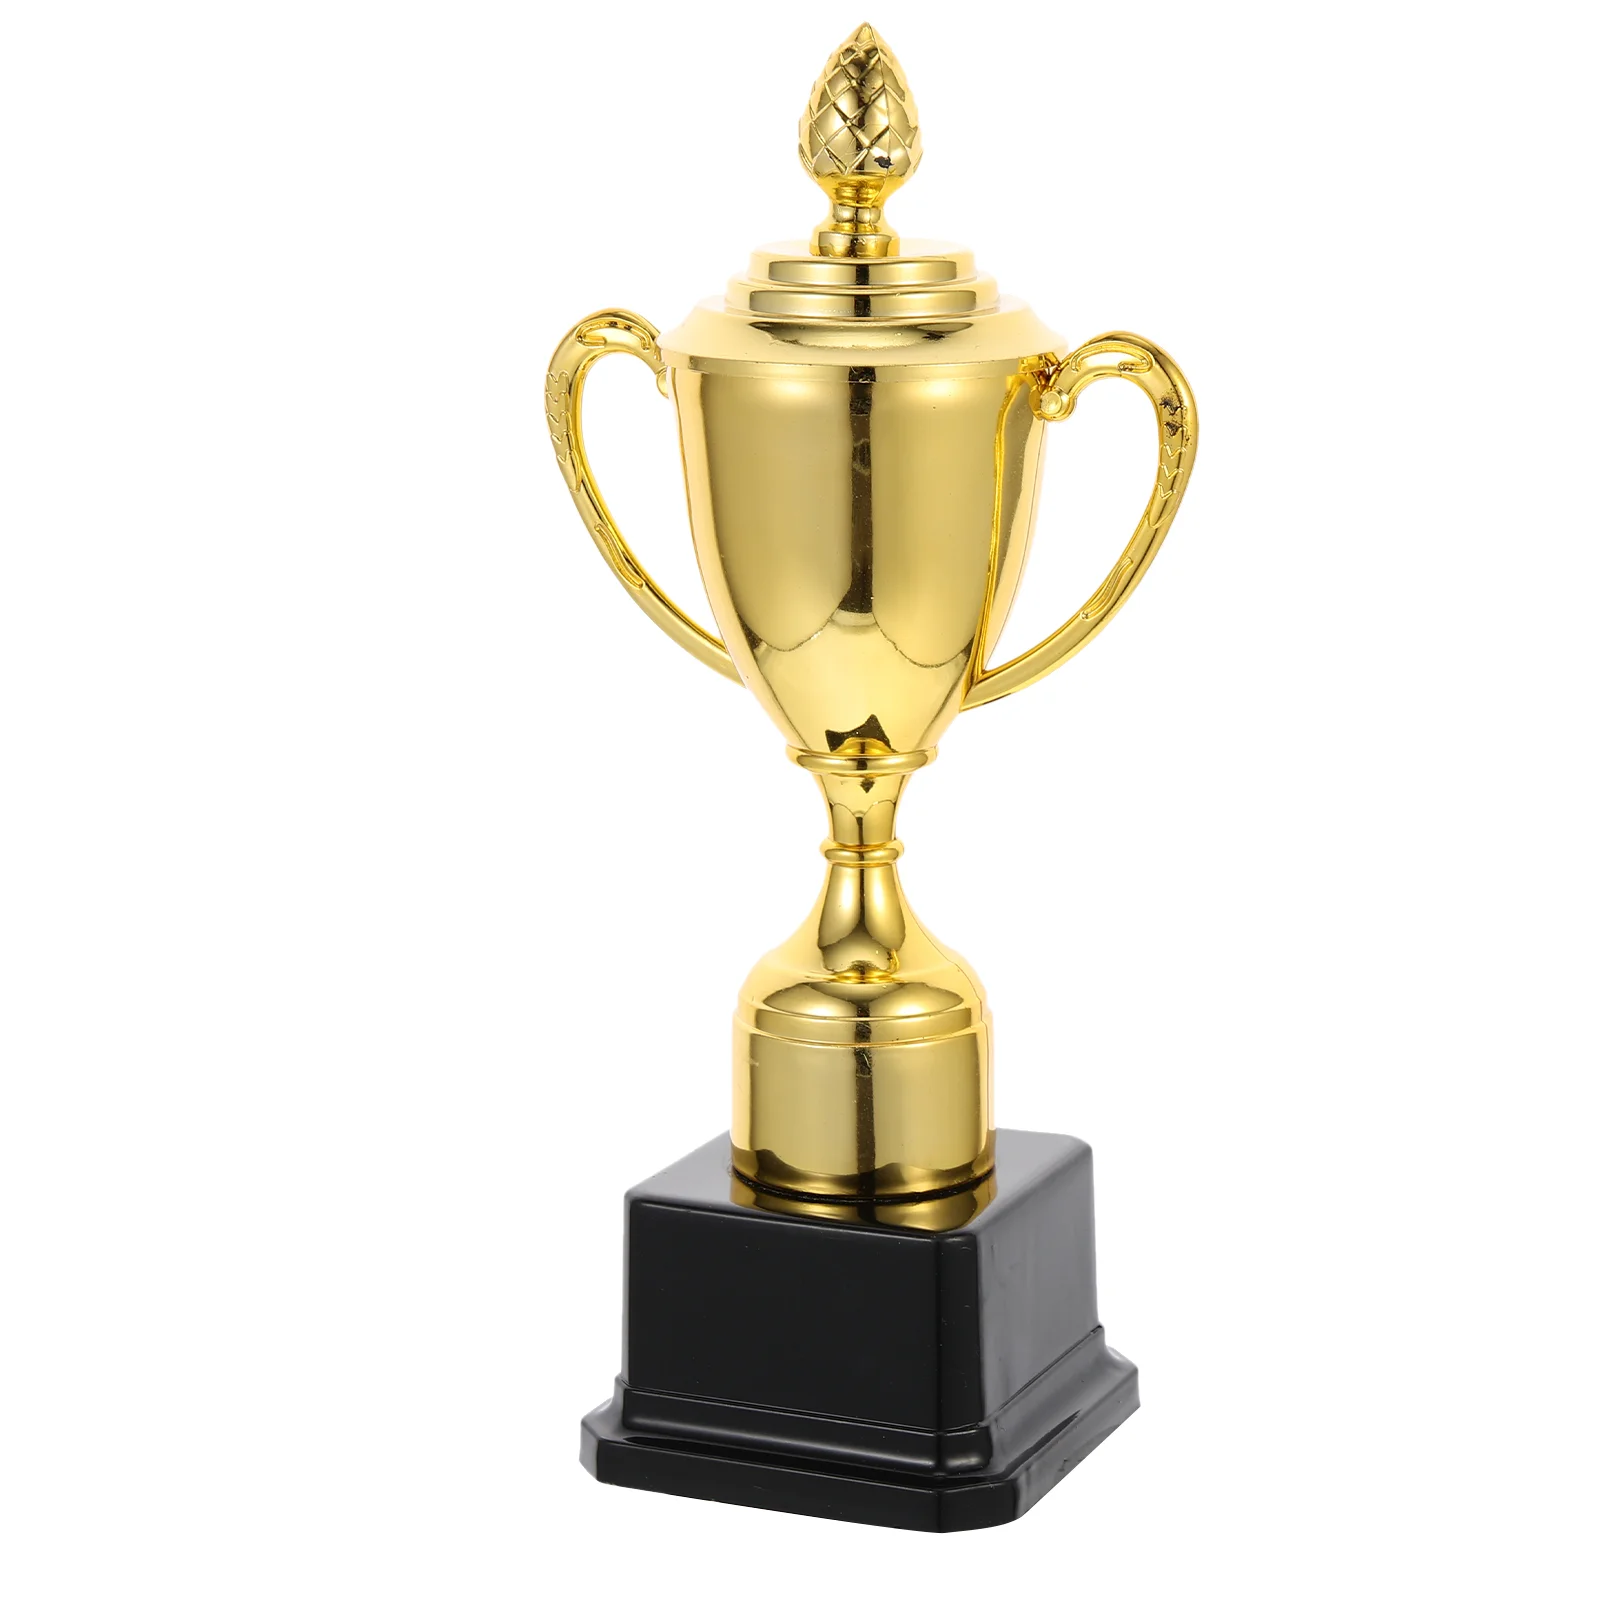 

Trophy Cup Award Trophies Gold Mini Awards Winner Kids Partycompetition Prize Trophys Golden Cups Rewardfavors Gameand Soccer